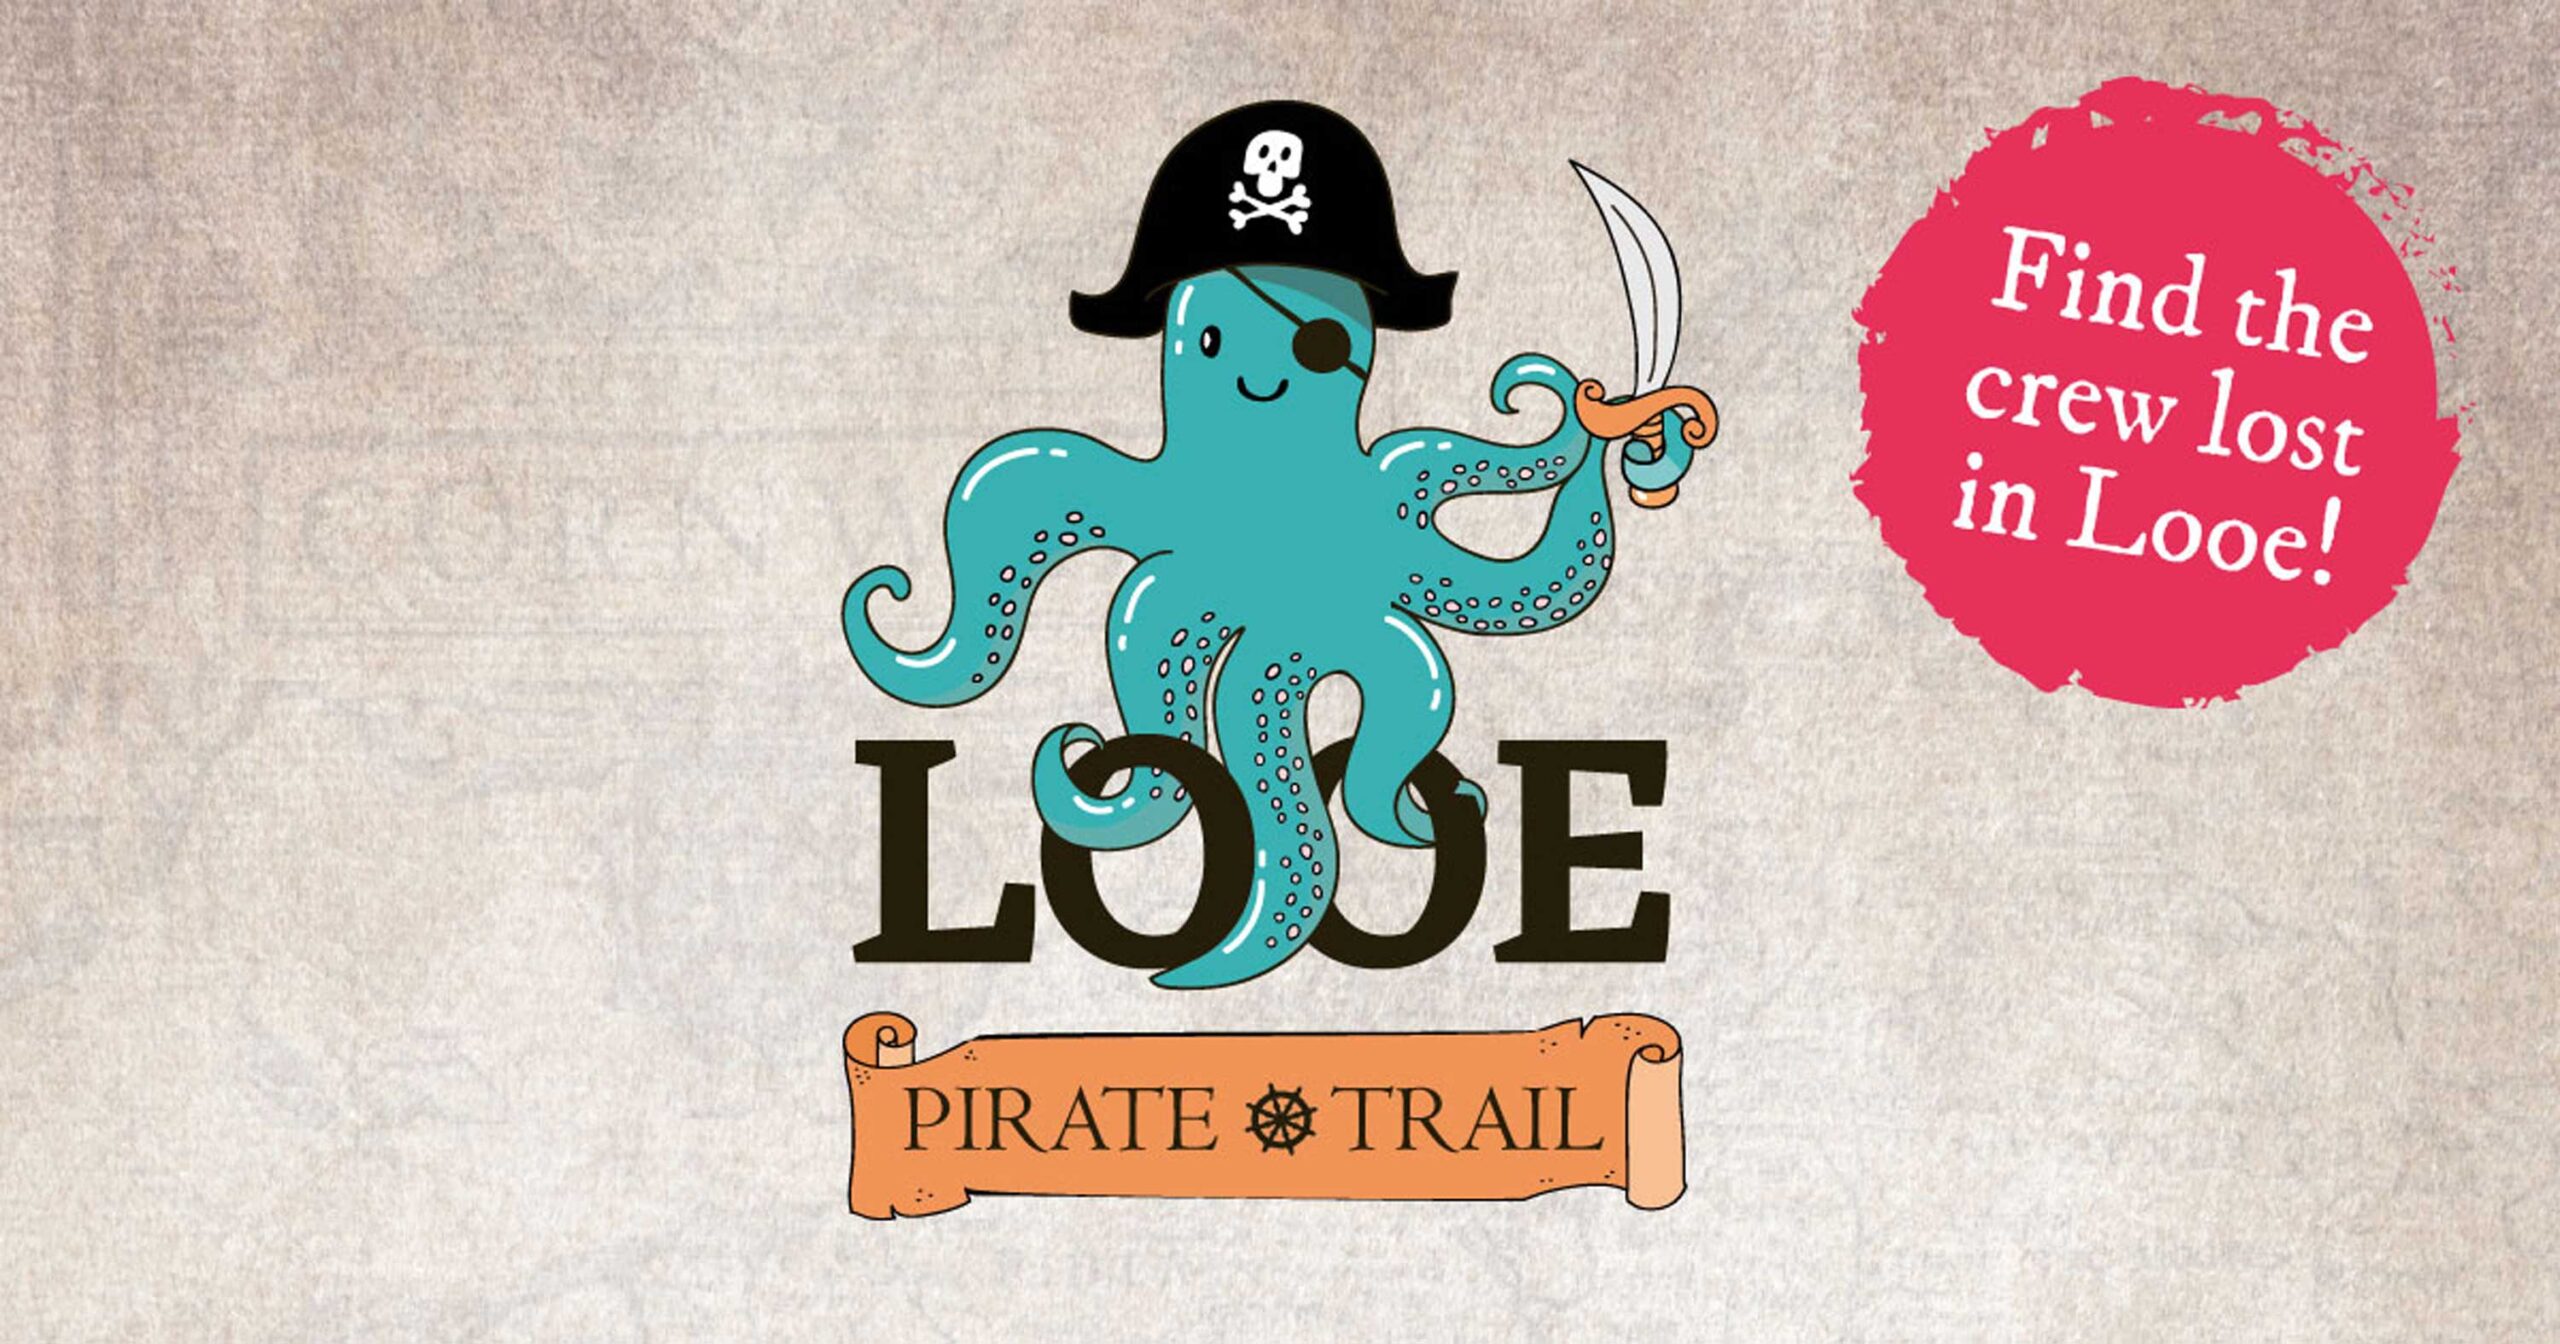 Looe Pirate Trail - find the crew lost in Looe!